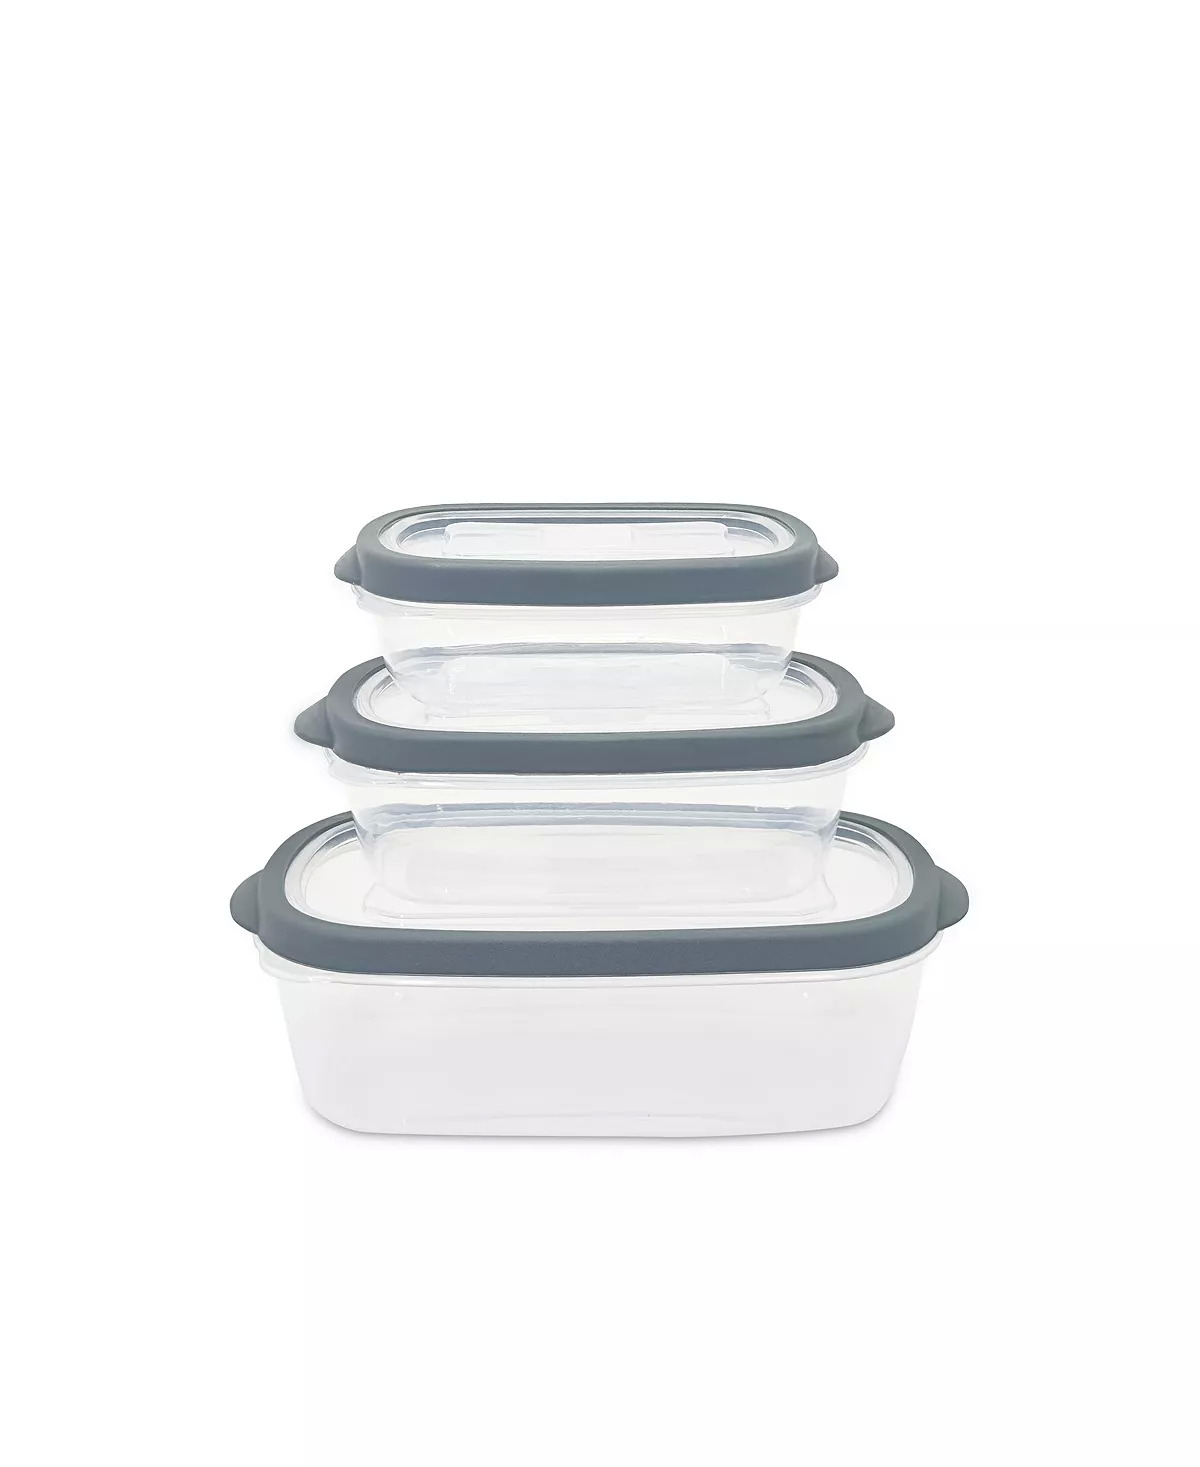 6-Piece Sedona Rectangle Storage Container Set $5.59, 2-Speed Art & CoImmersion Blender $10.79 & More + Free Store Pickup at Macy's or F/S on Orders $25+